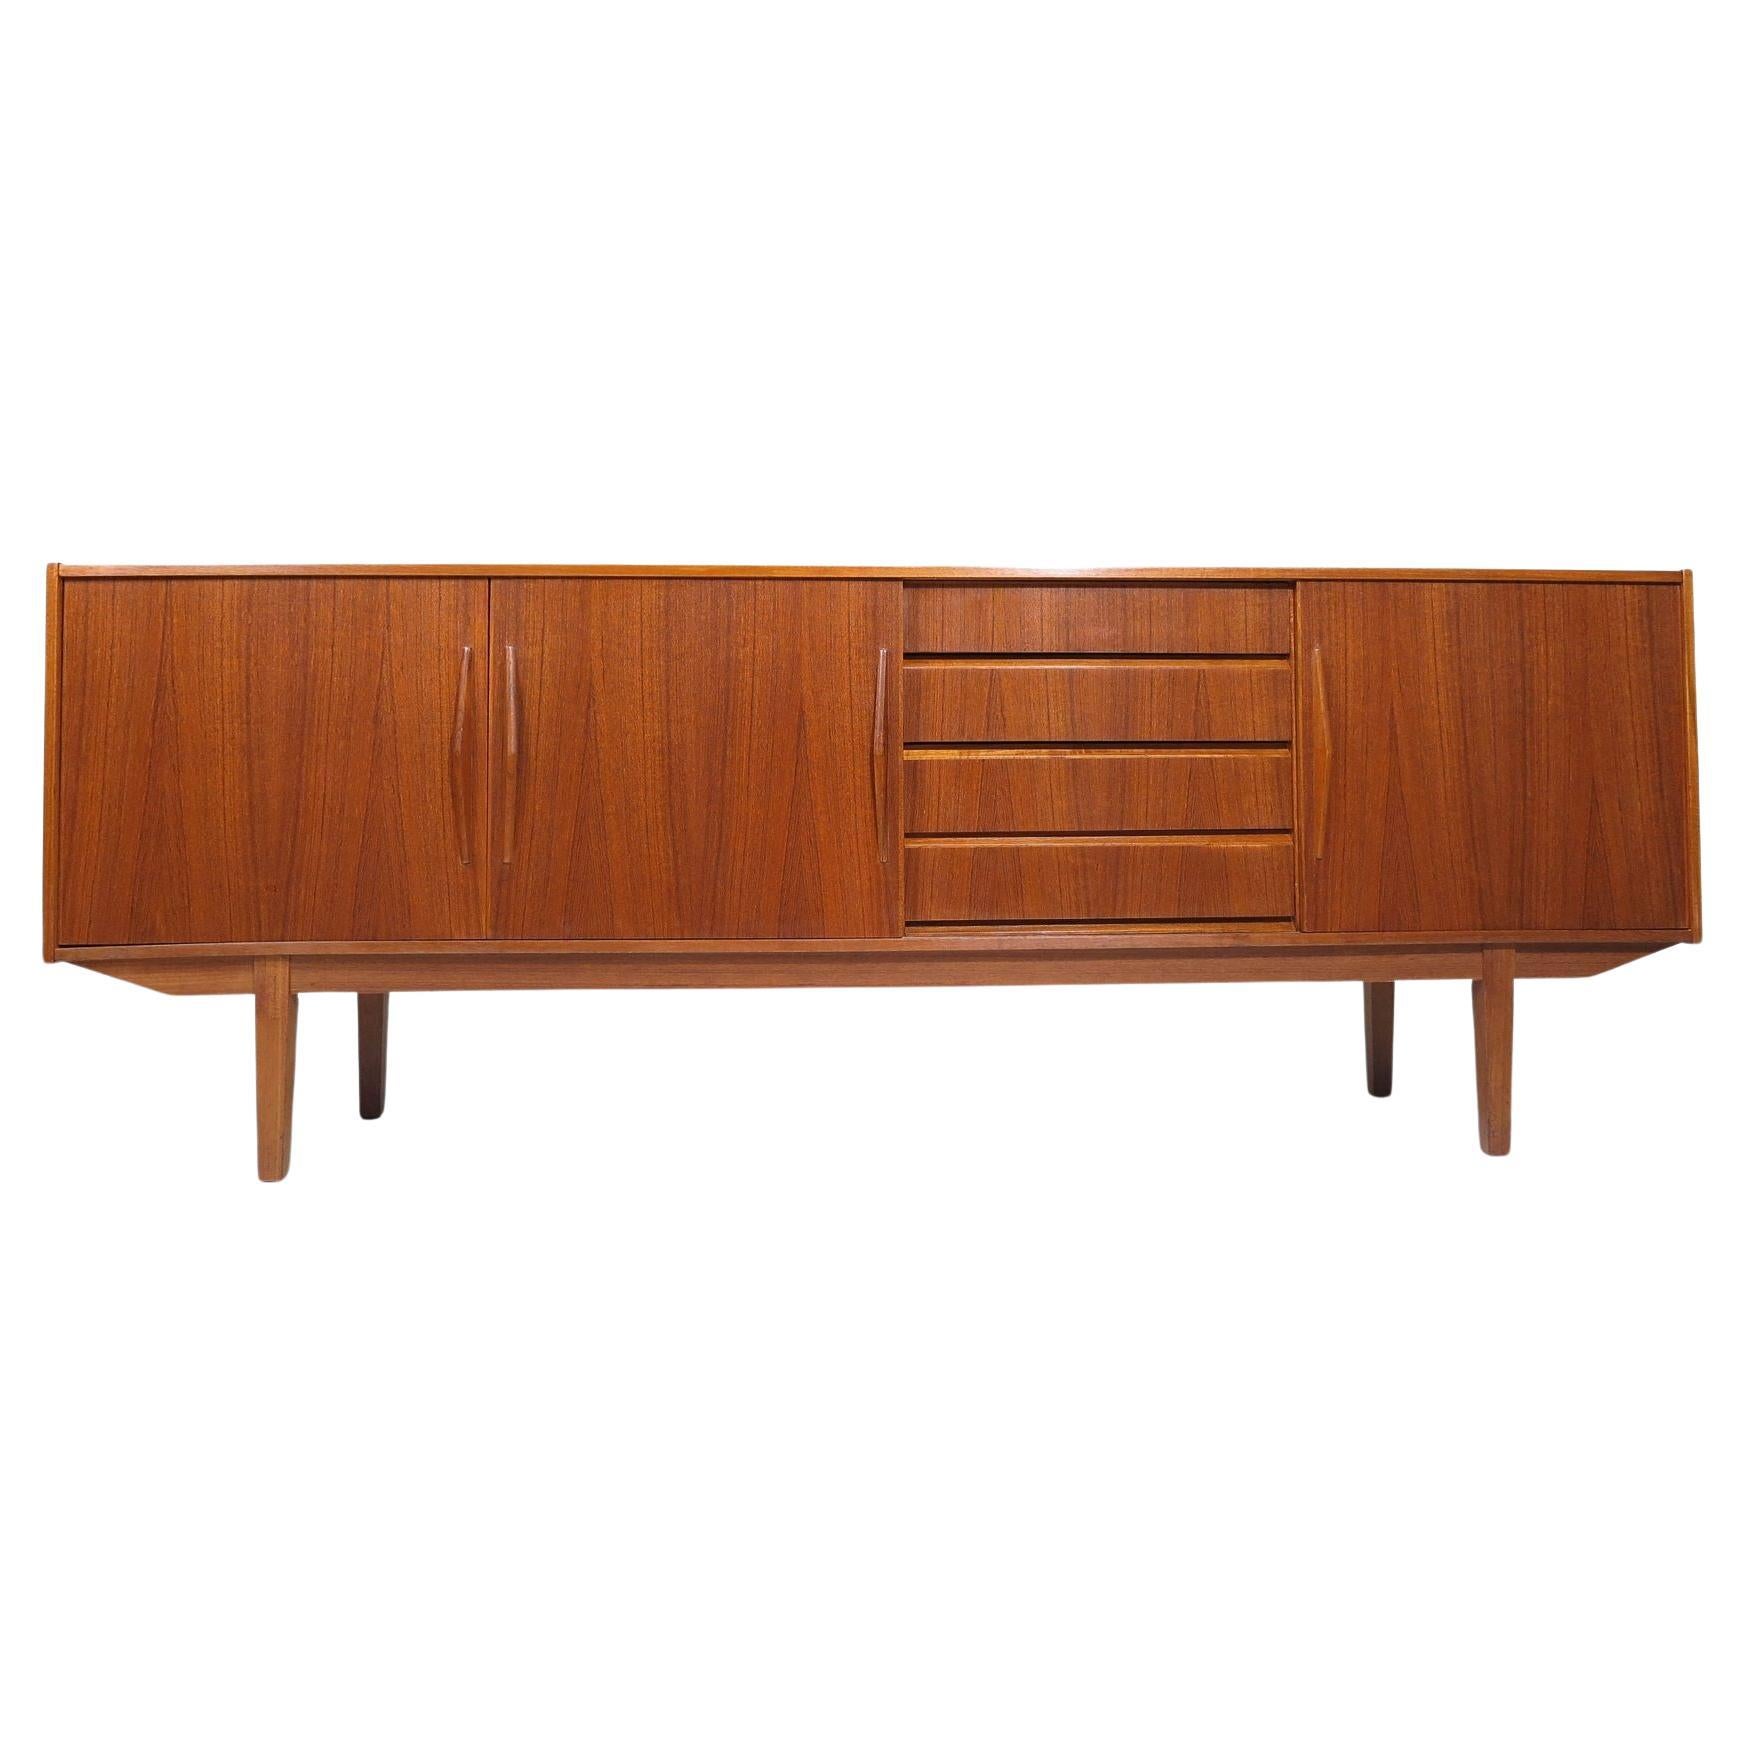 1960's Mid-century Danish Teak Credenza with Doors and Drawers For Sale